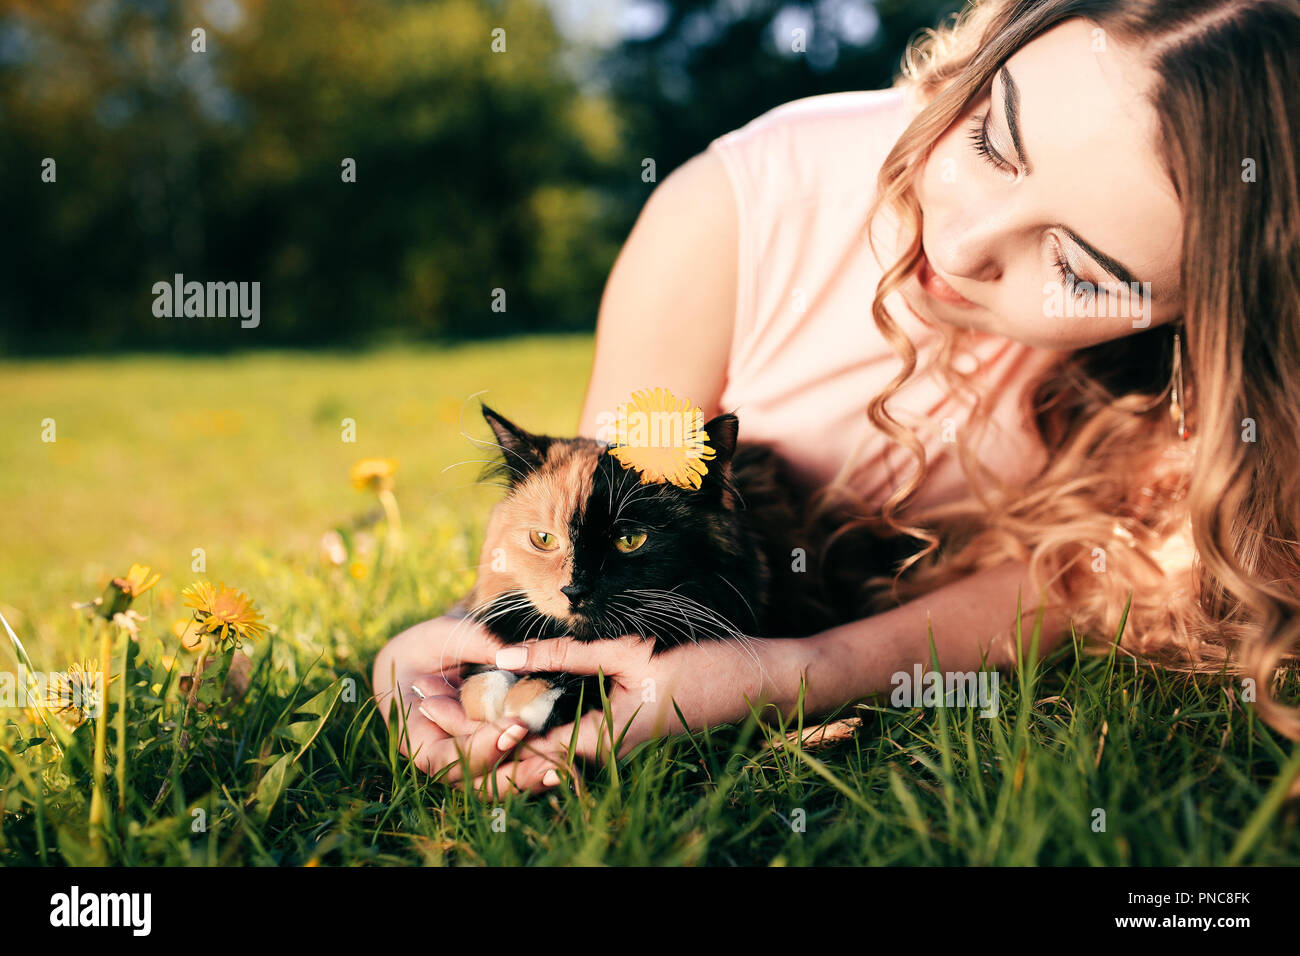 Girl lying on grass with cat. Spring or summer warm weather concept. Bokeh background. Ginger kitten with two face color mask. Stock Photo